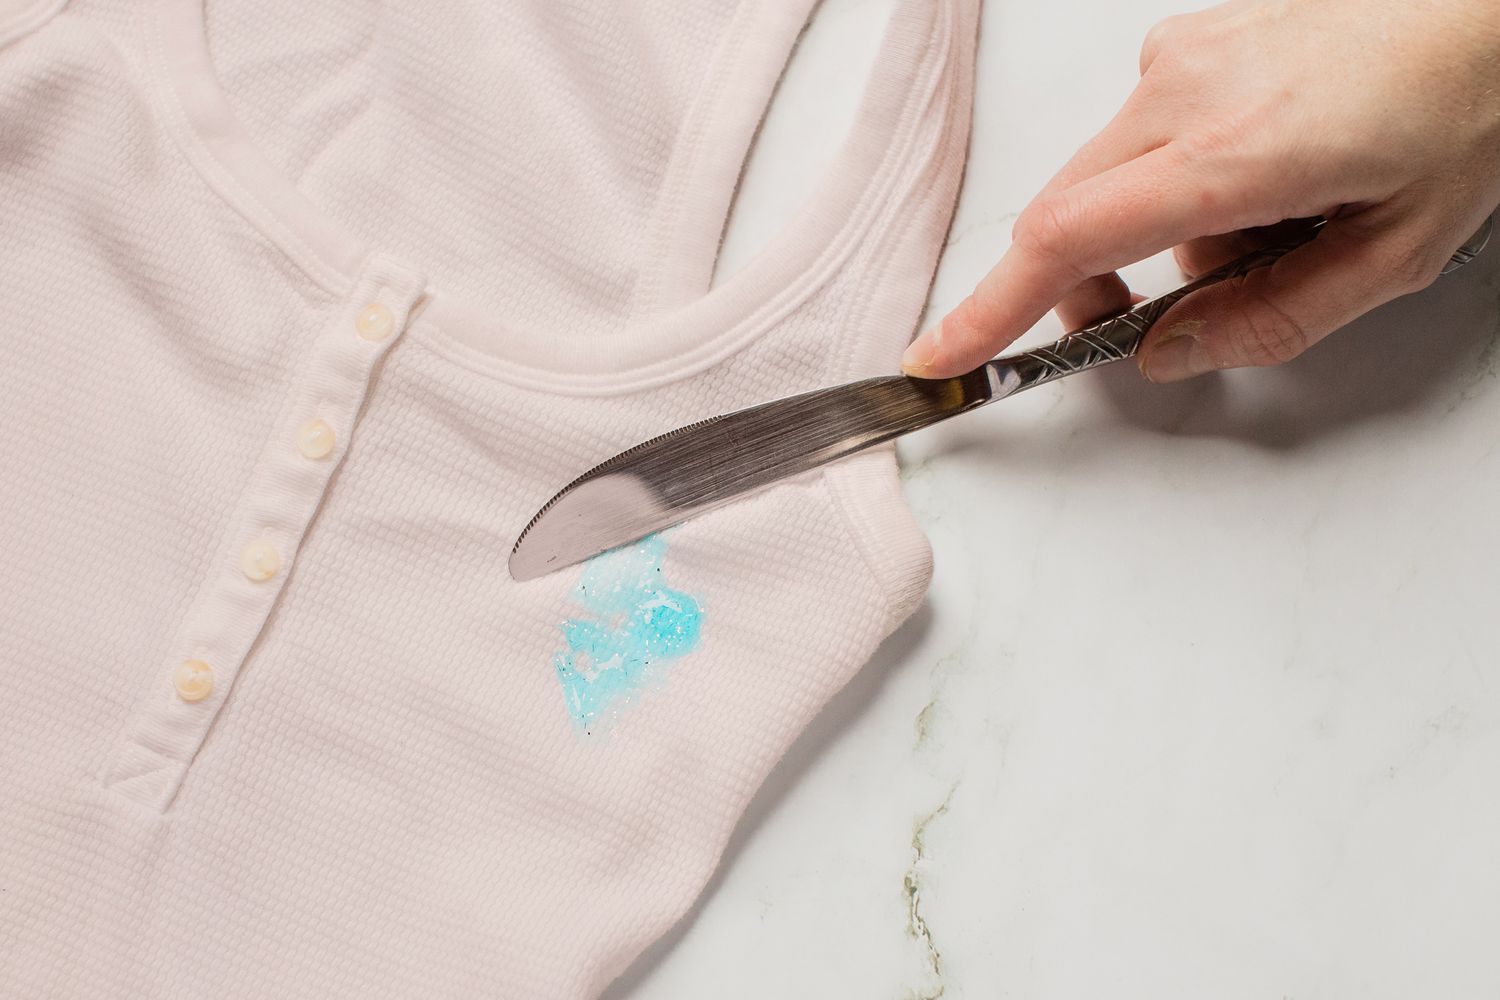 How To Remove Glitter Glue From Clothing